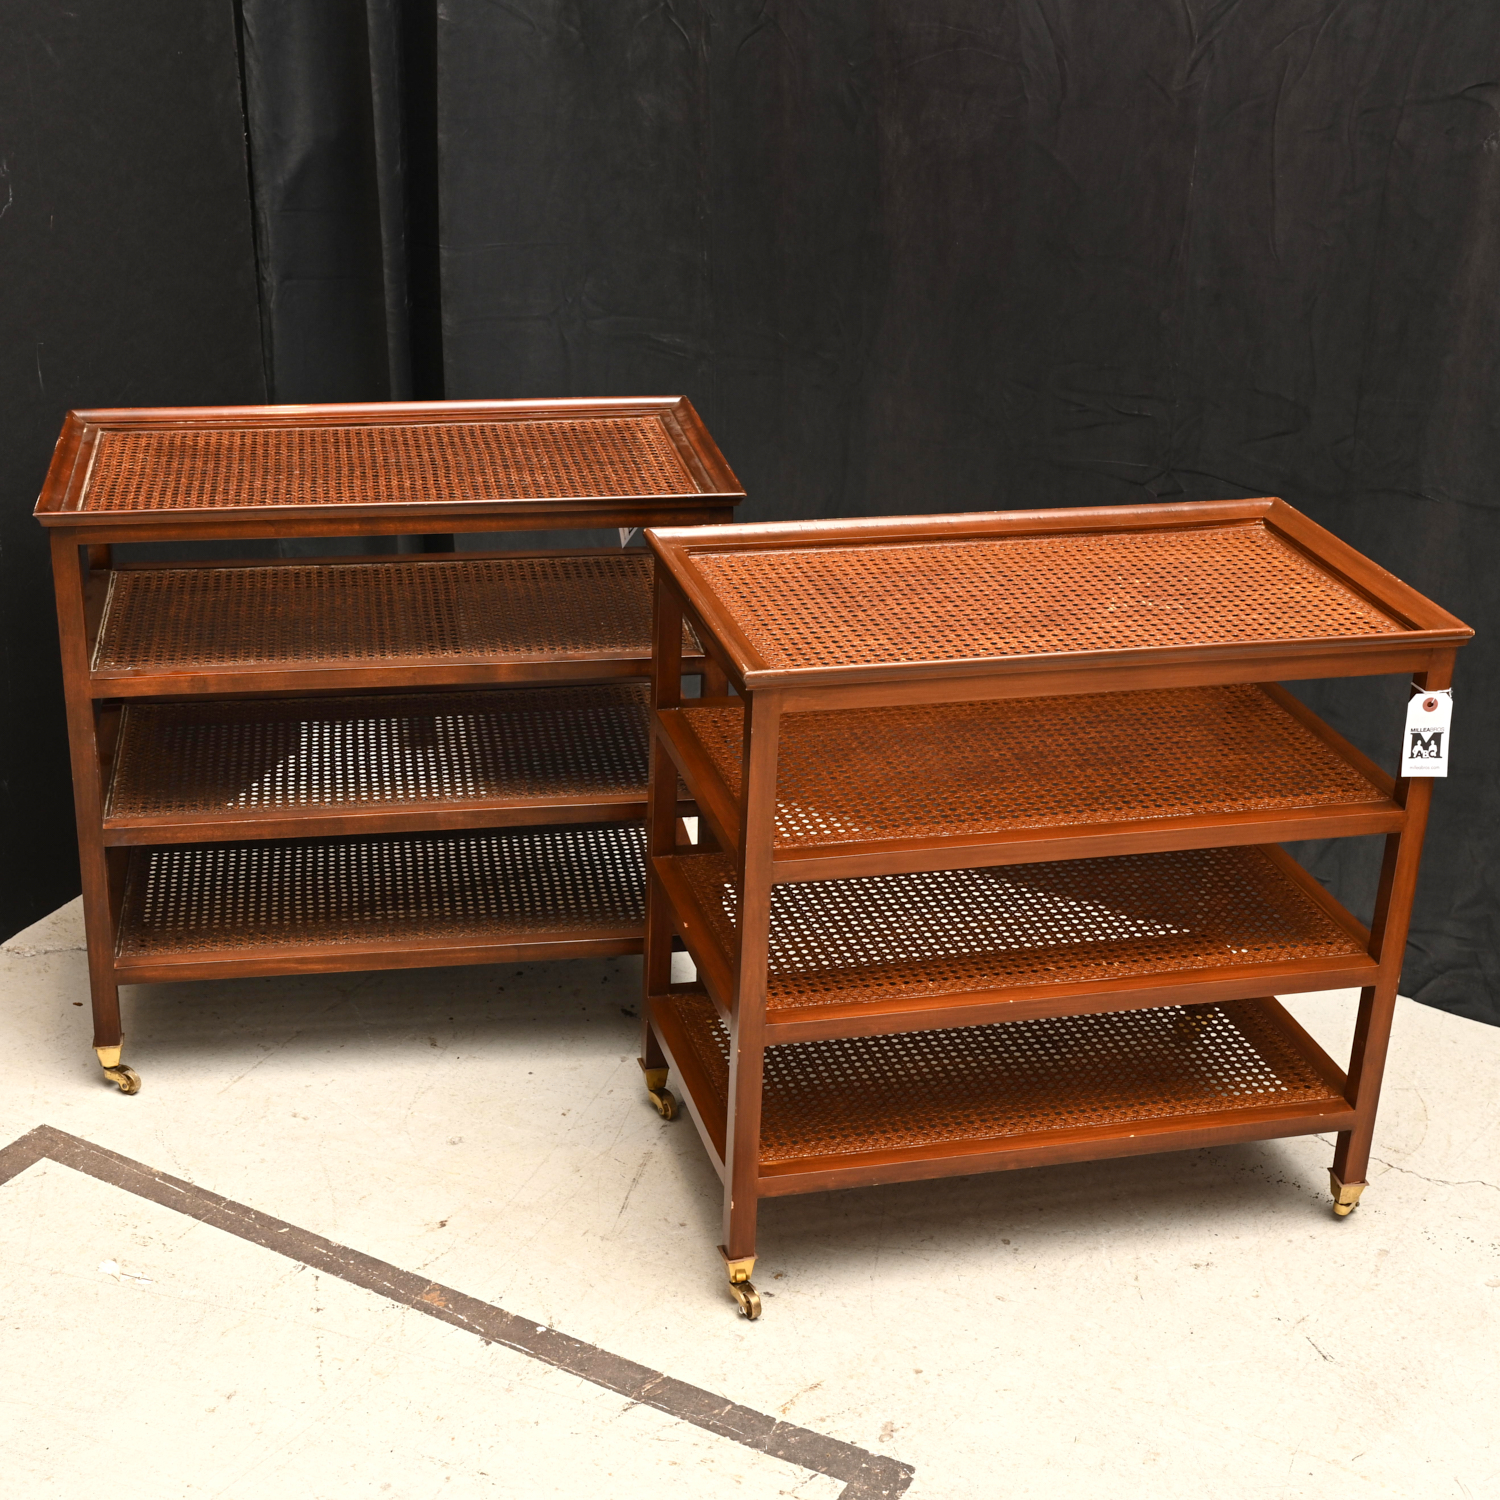 NICE PAIR CONTEMPORARY CANED ETAGERE